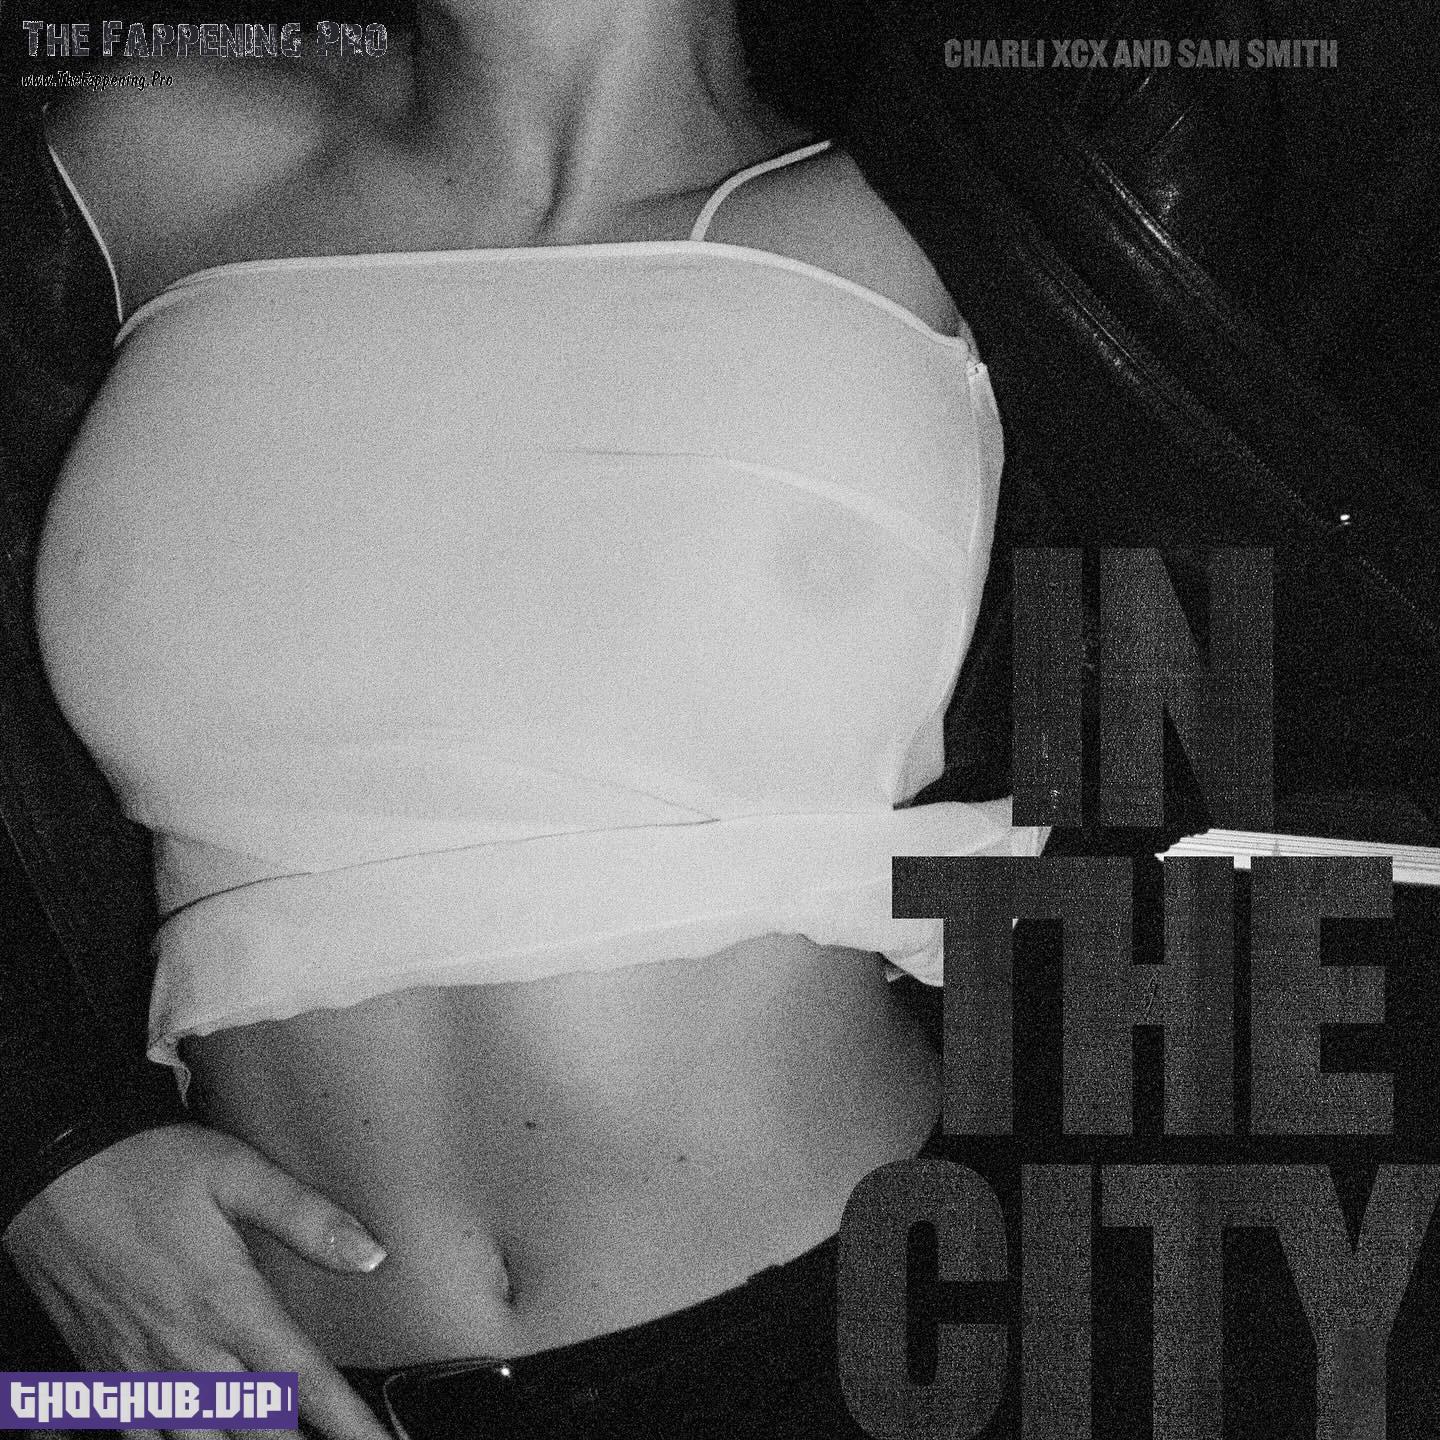 Charli XCX Tits For In The City Promo 3 Photos